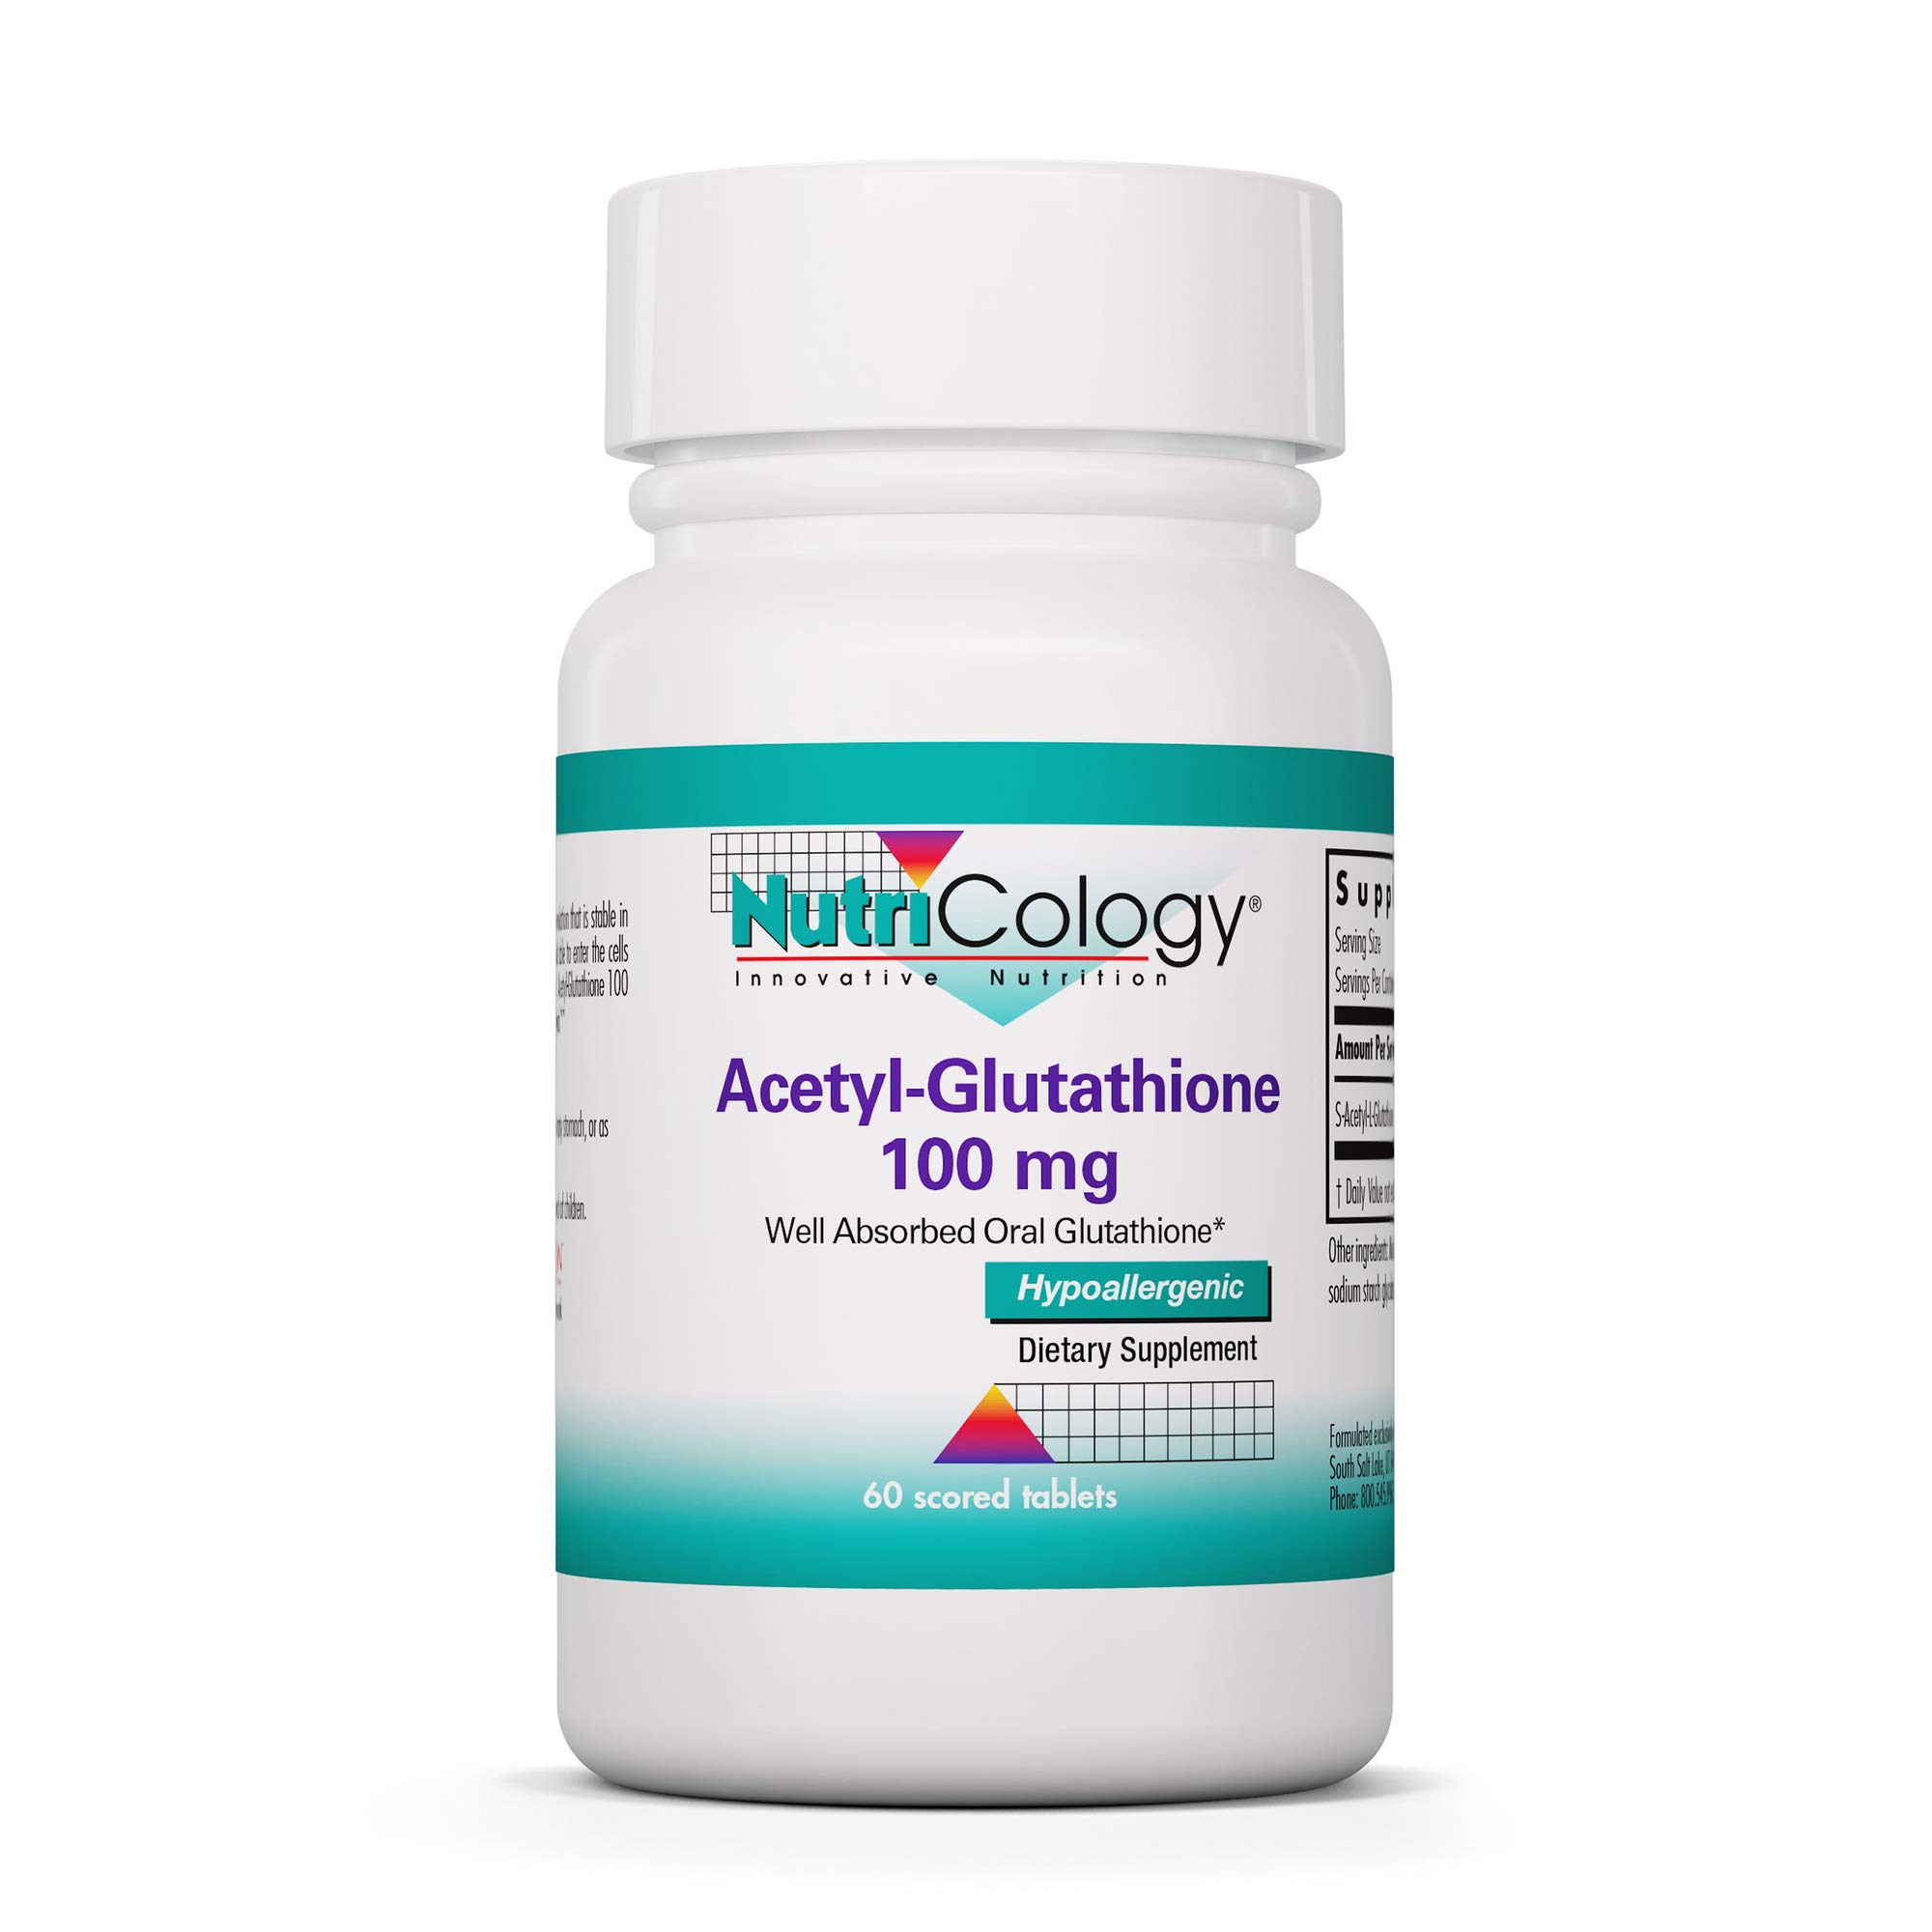 NutriCology Acetyl Glutathione 100mg - Well-Absorbed, Hypoallergenic - 60 Scored Tablets